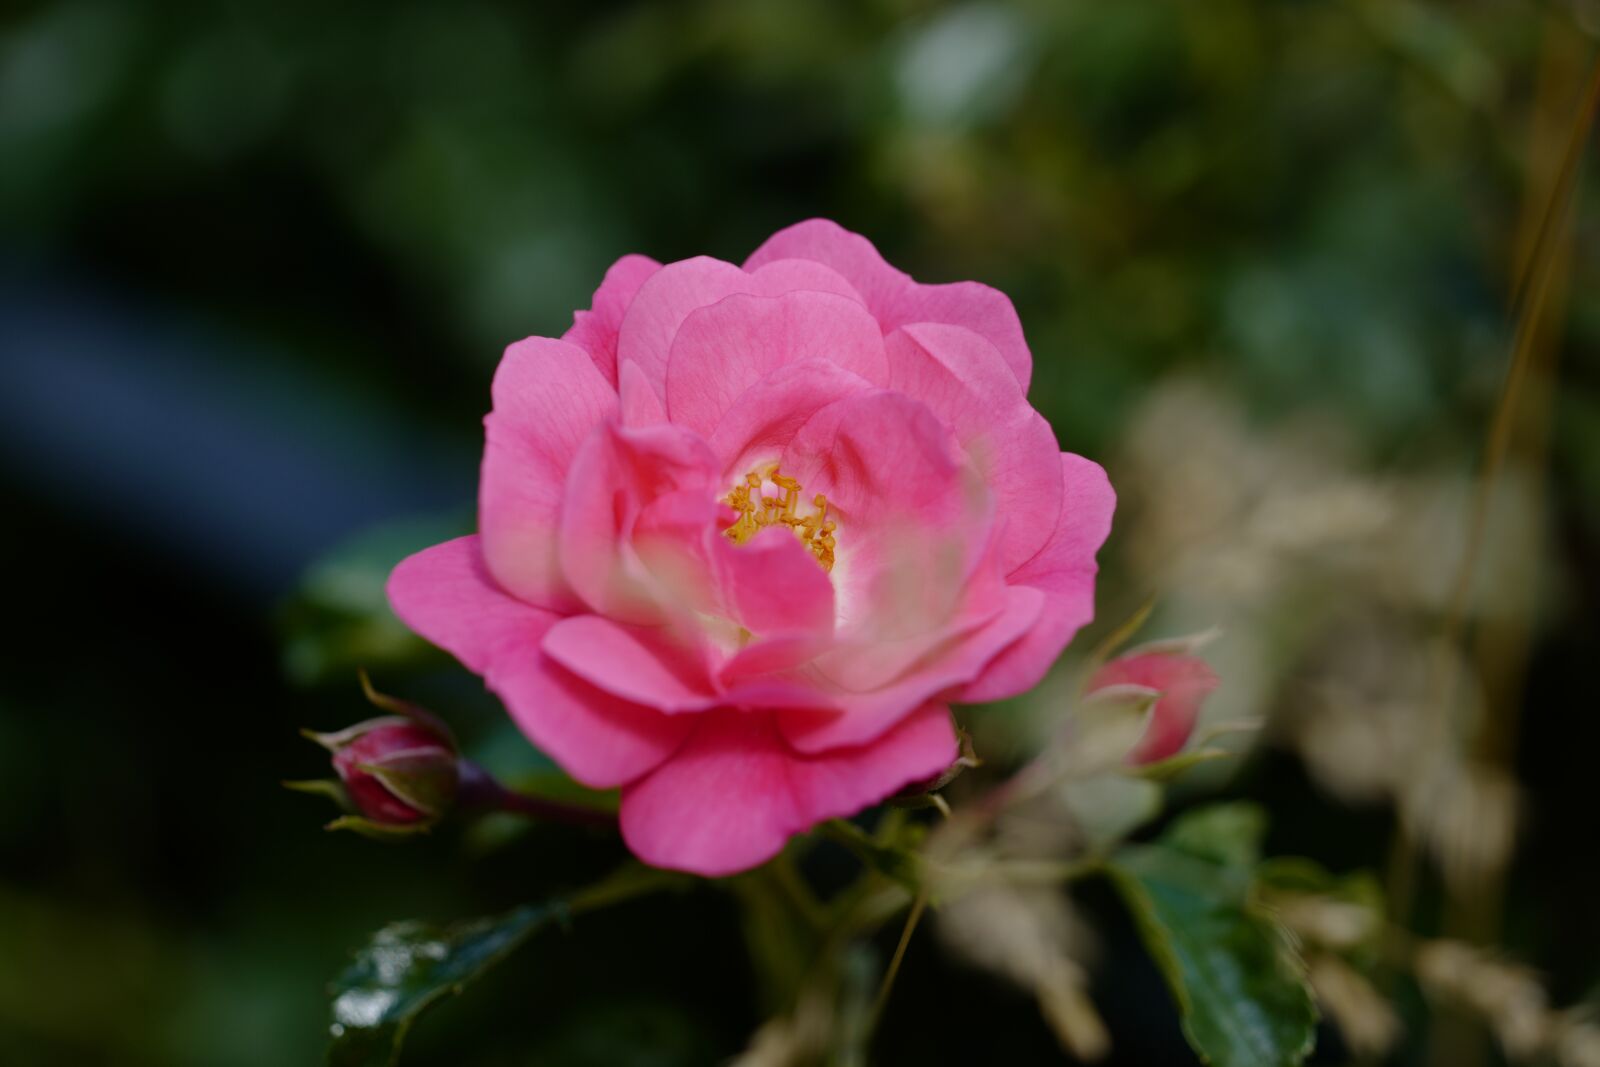 Leica CL sample photo. Flower, rose, nature photography